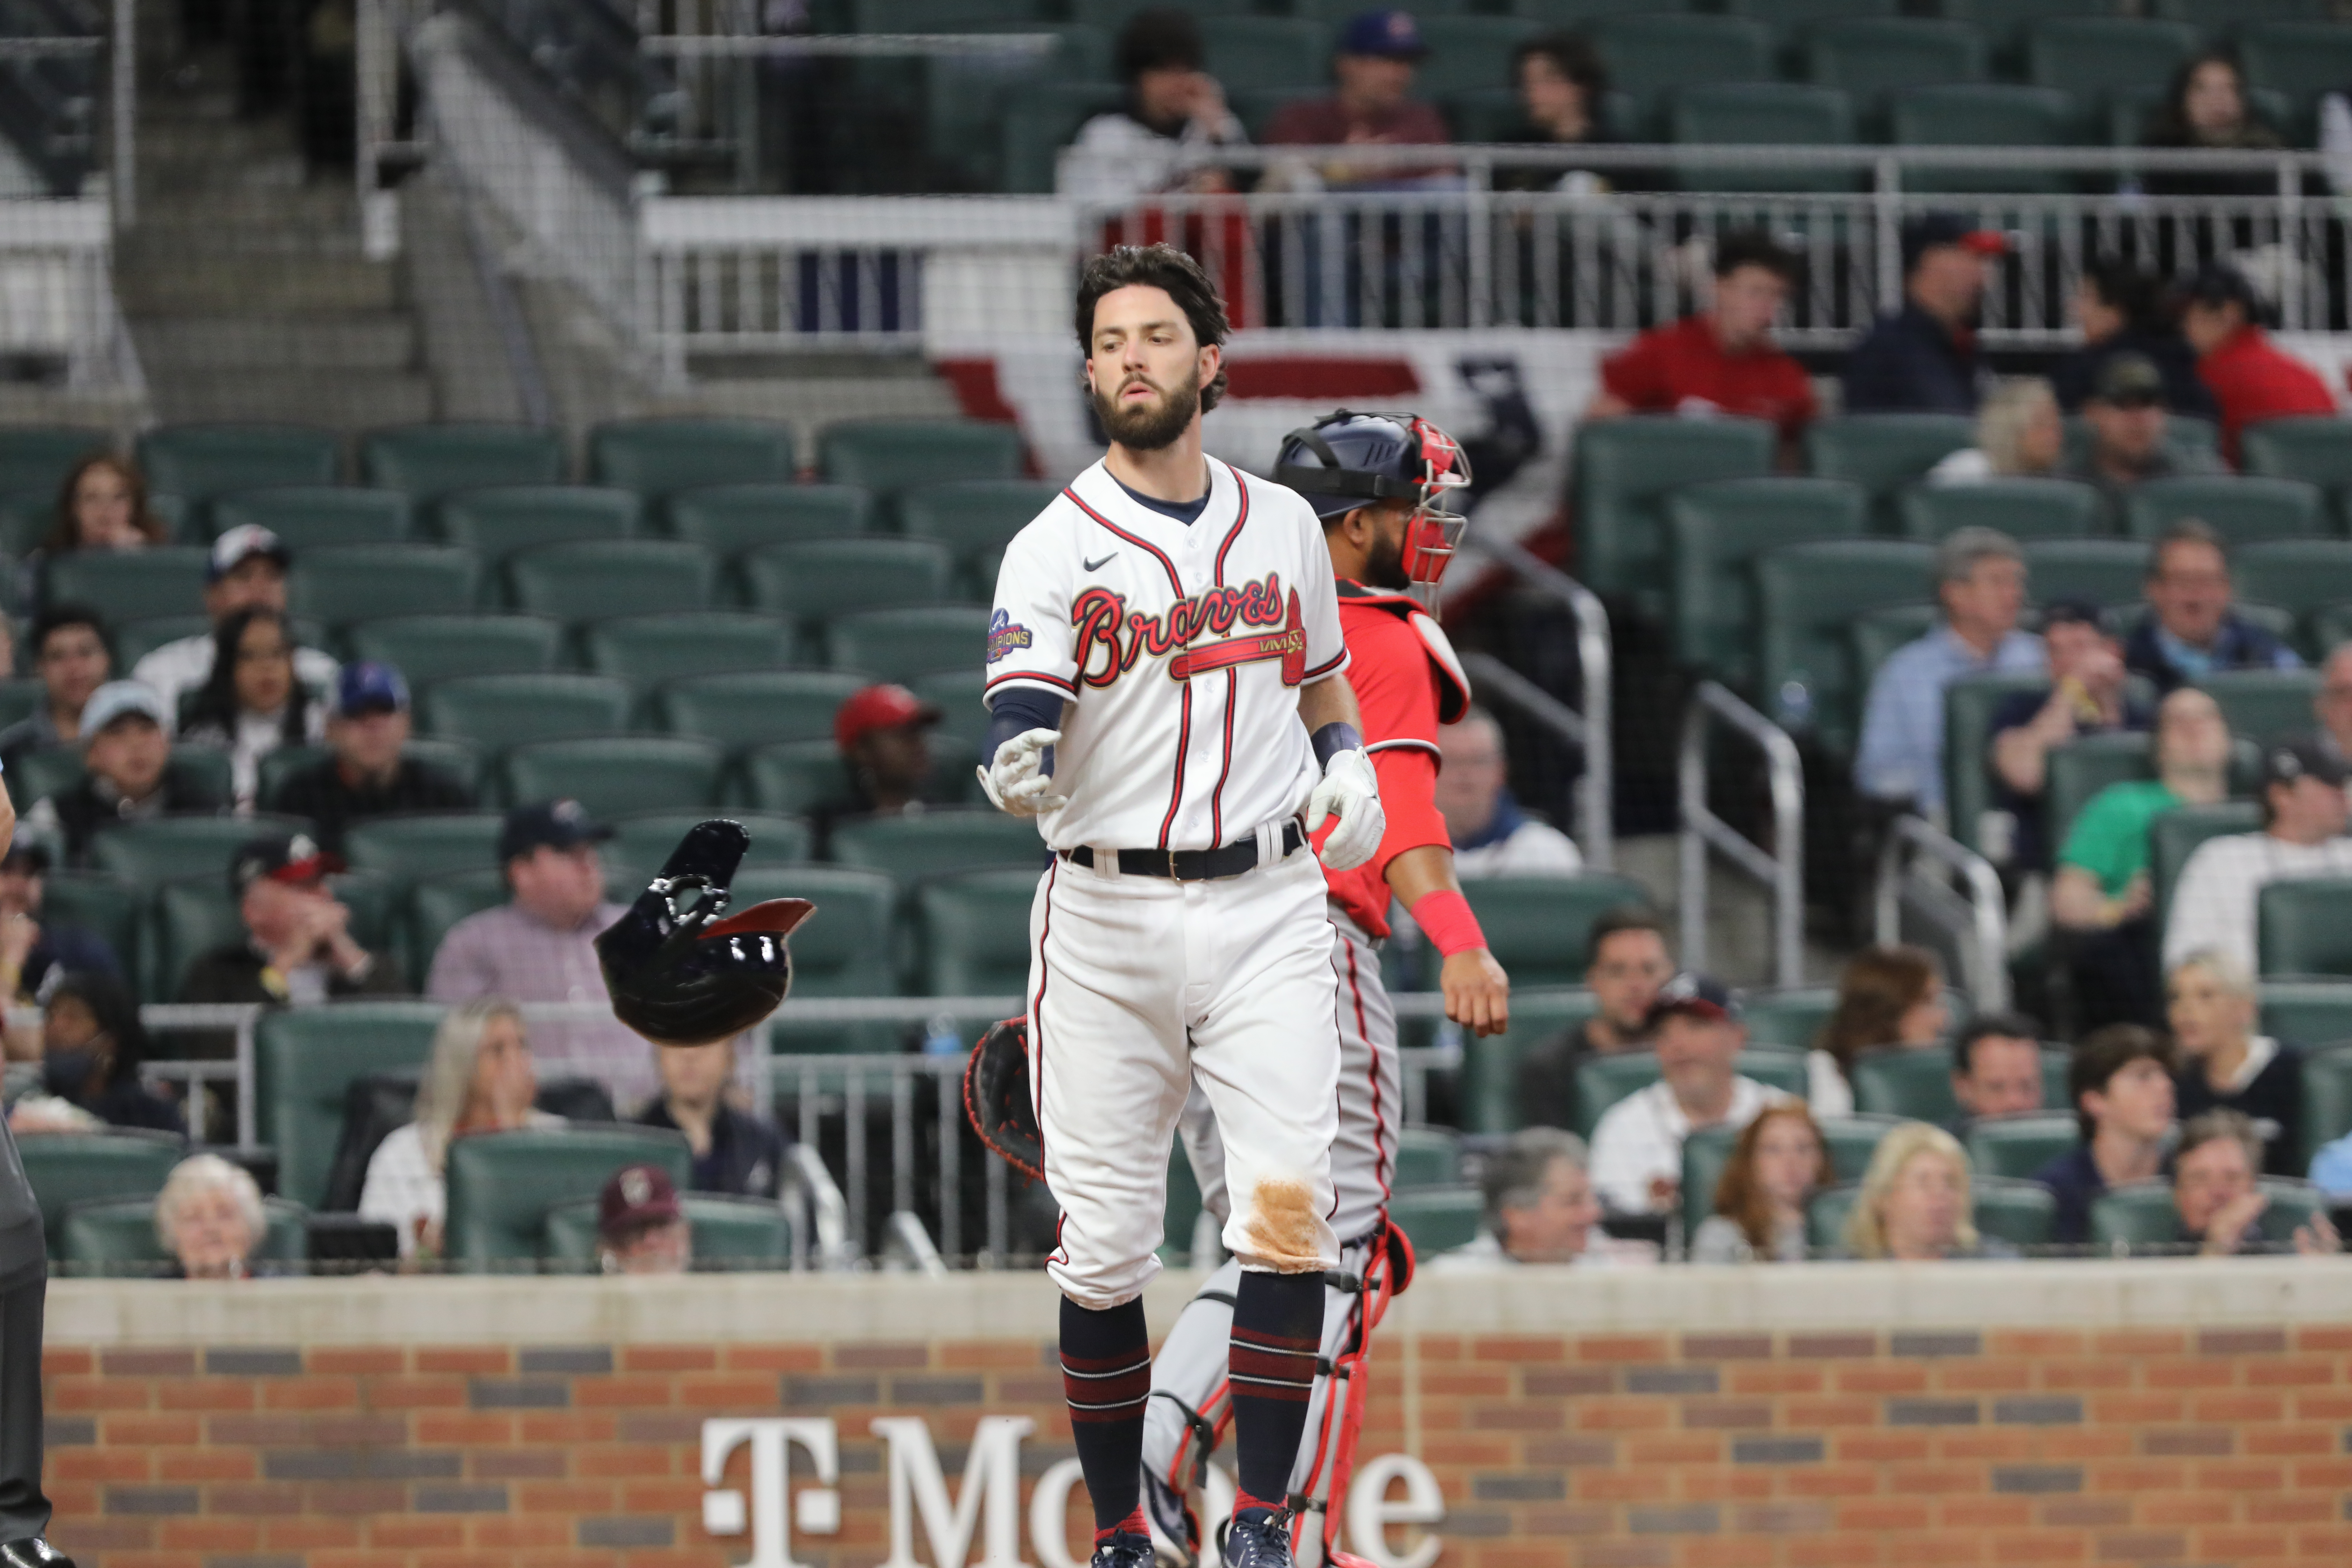 Braves Charity Auction - Dansby Swanson Game Worn Uniform: 1974